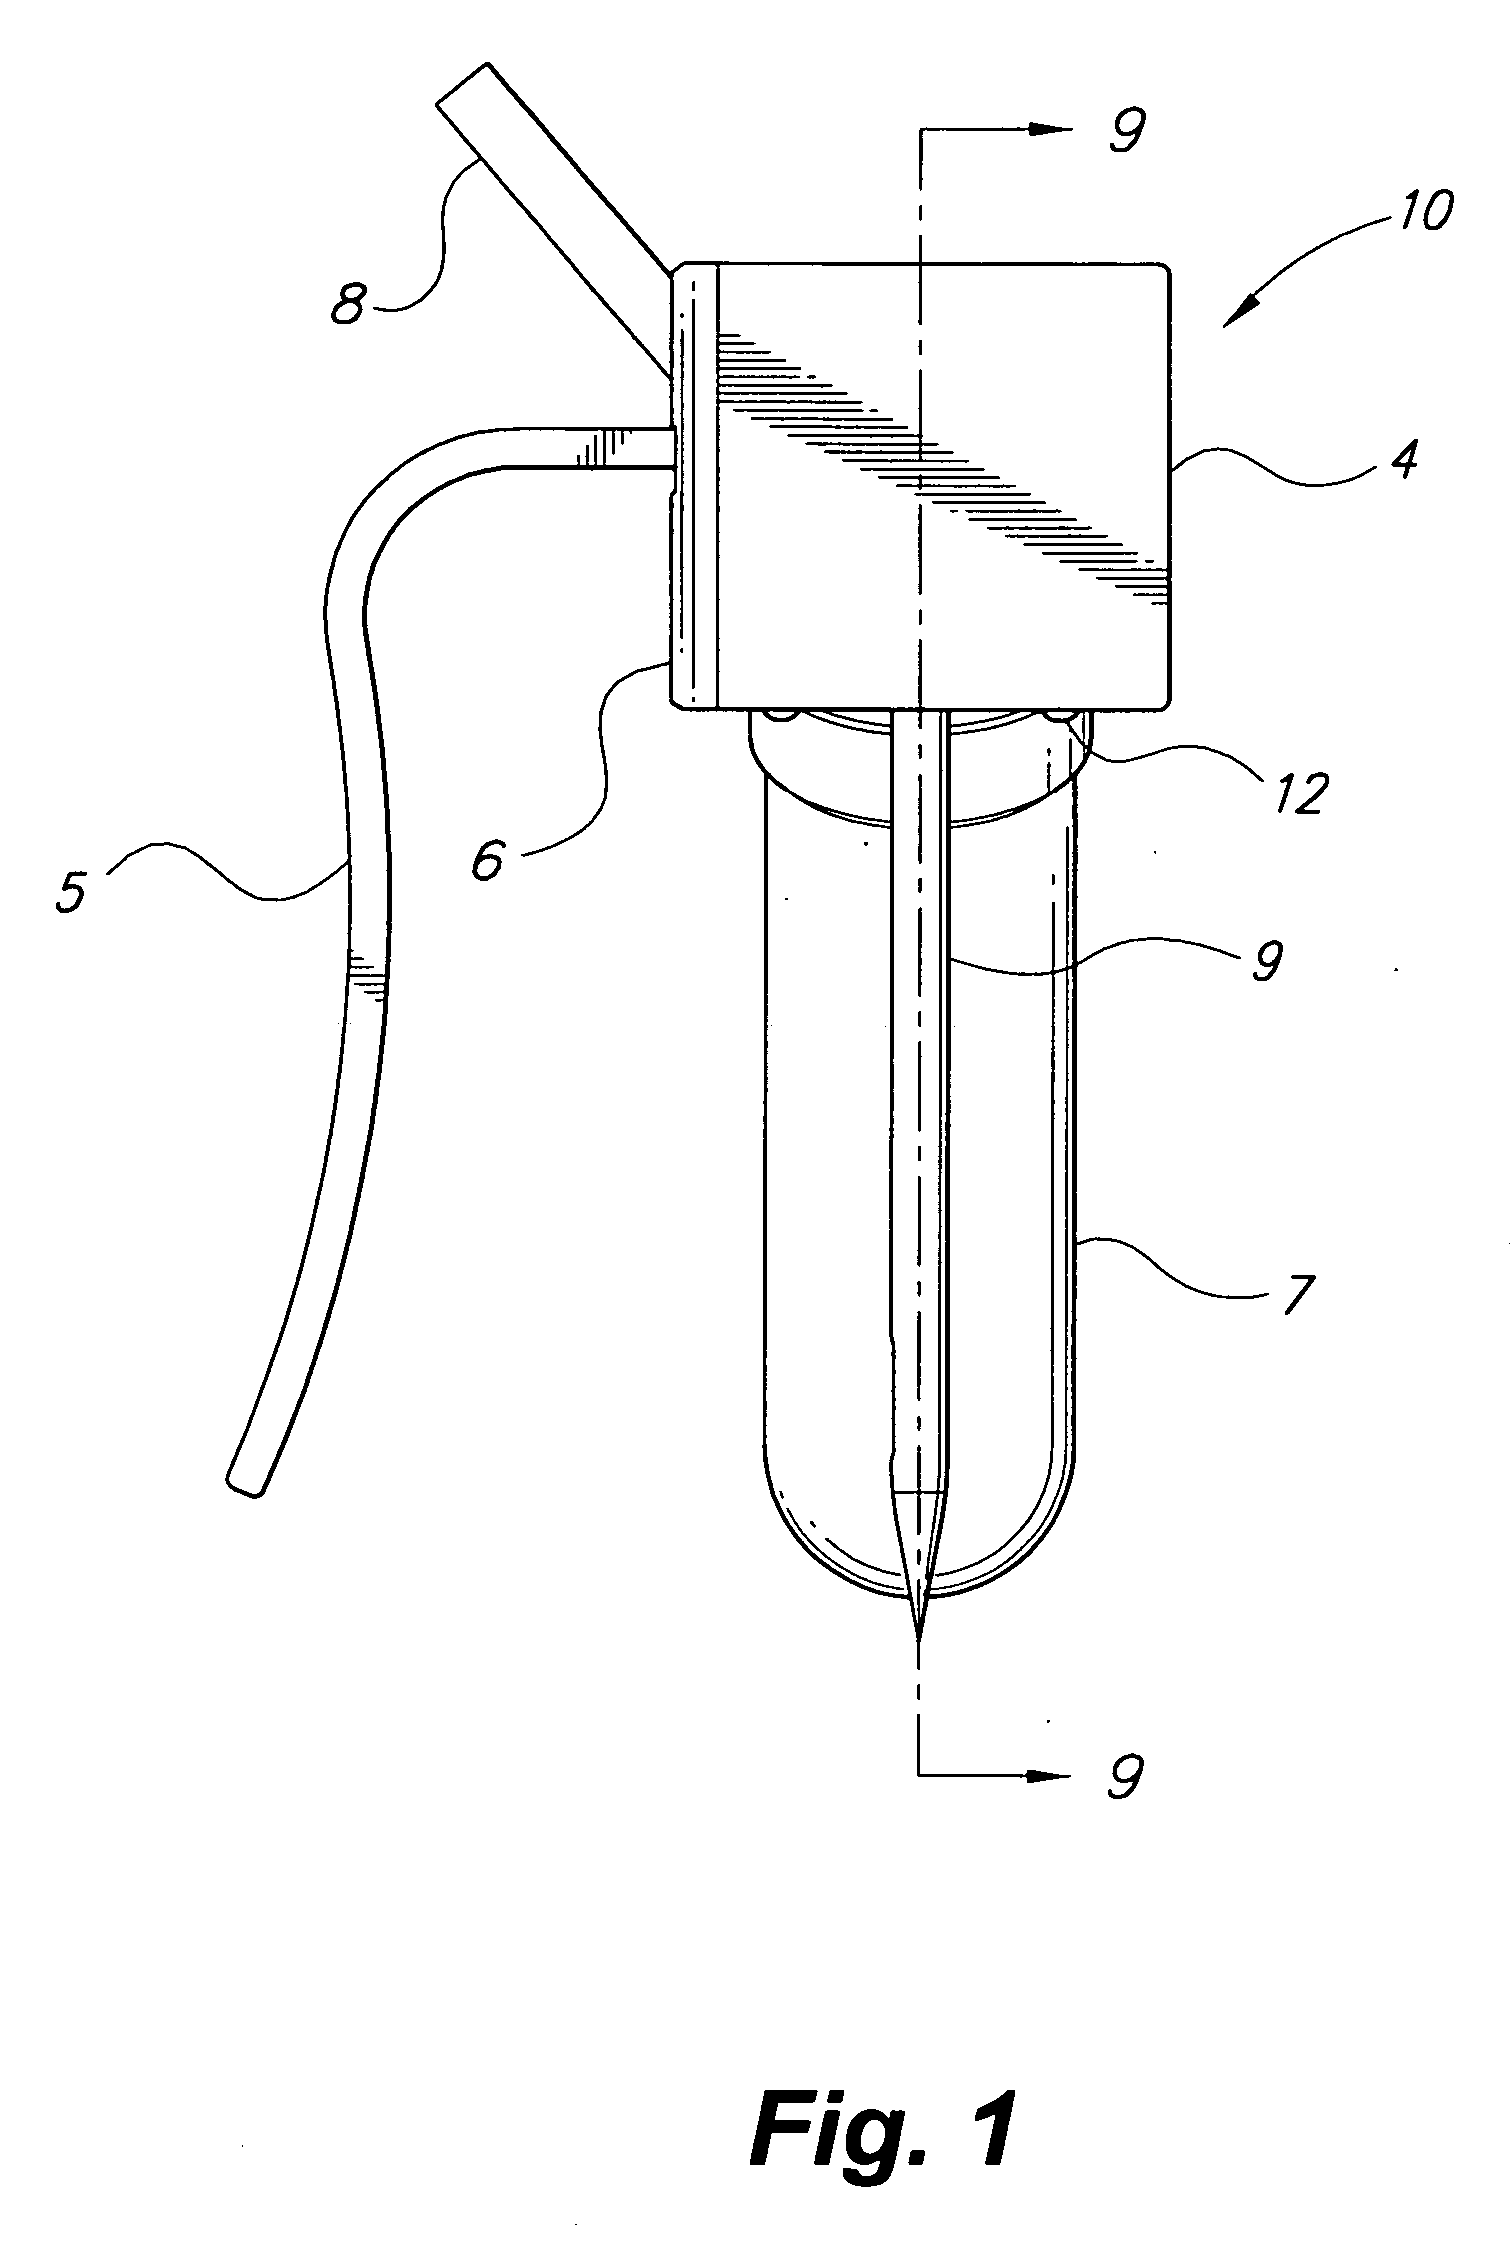 Wine bottle sealing and dispensing device